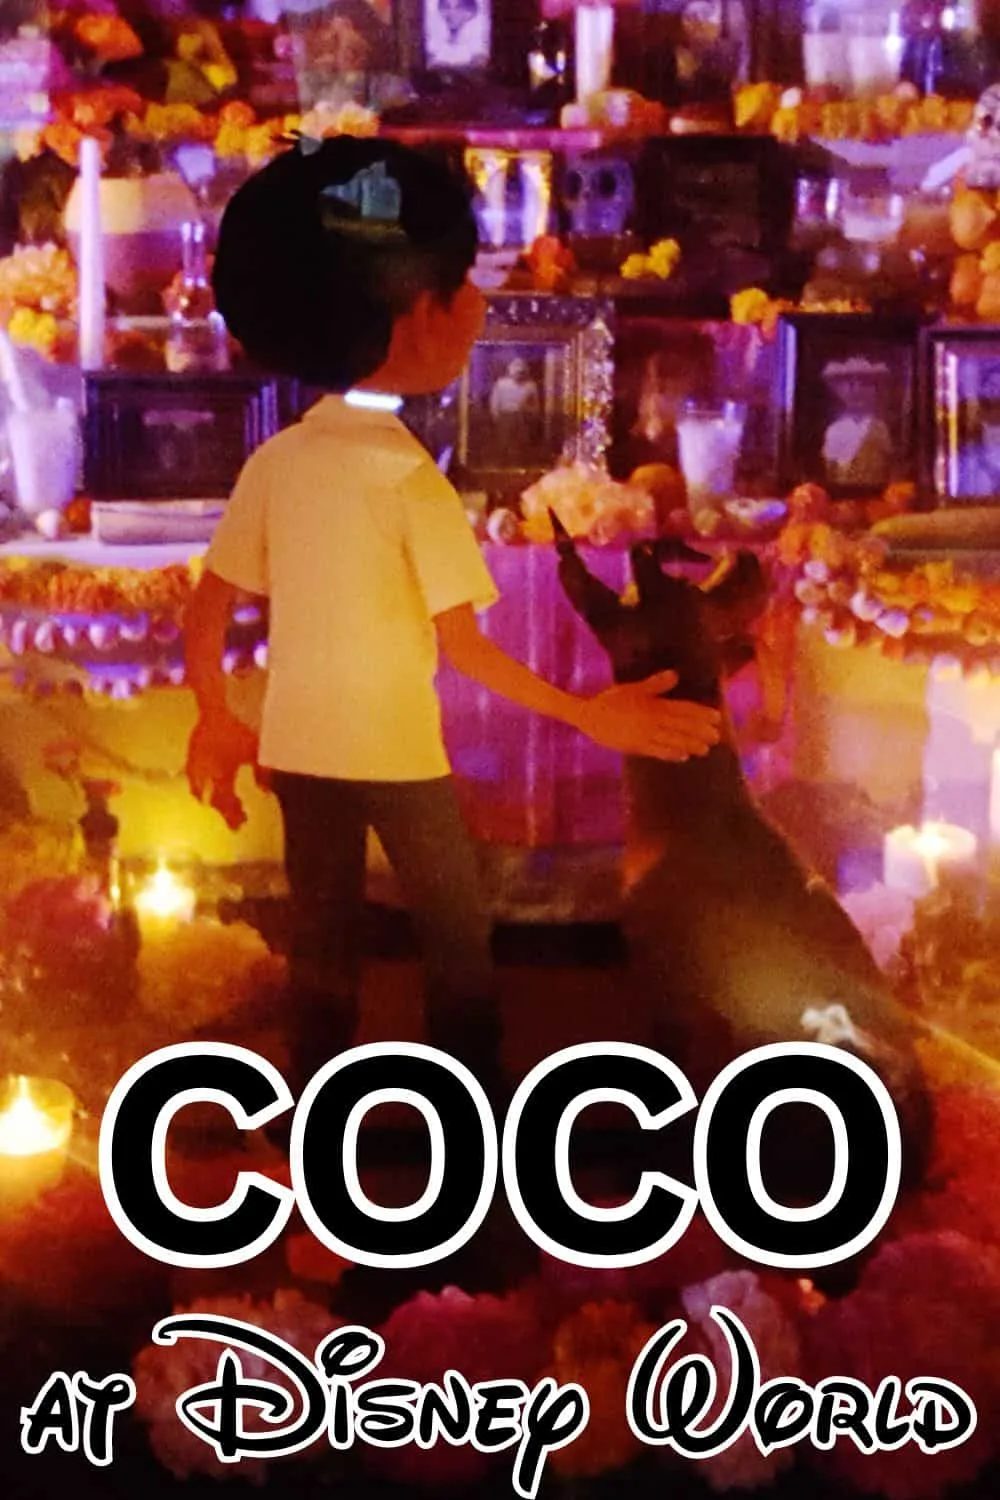 Where to find Movie References to Coco at Disney World